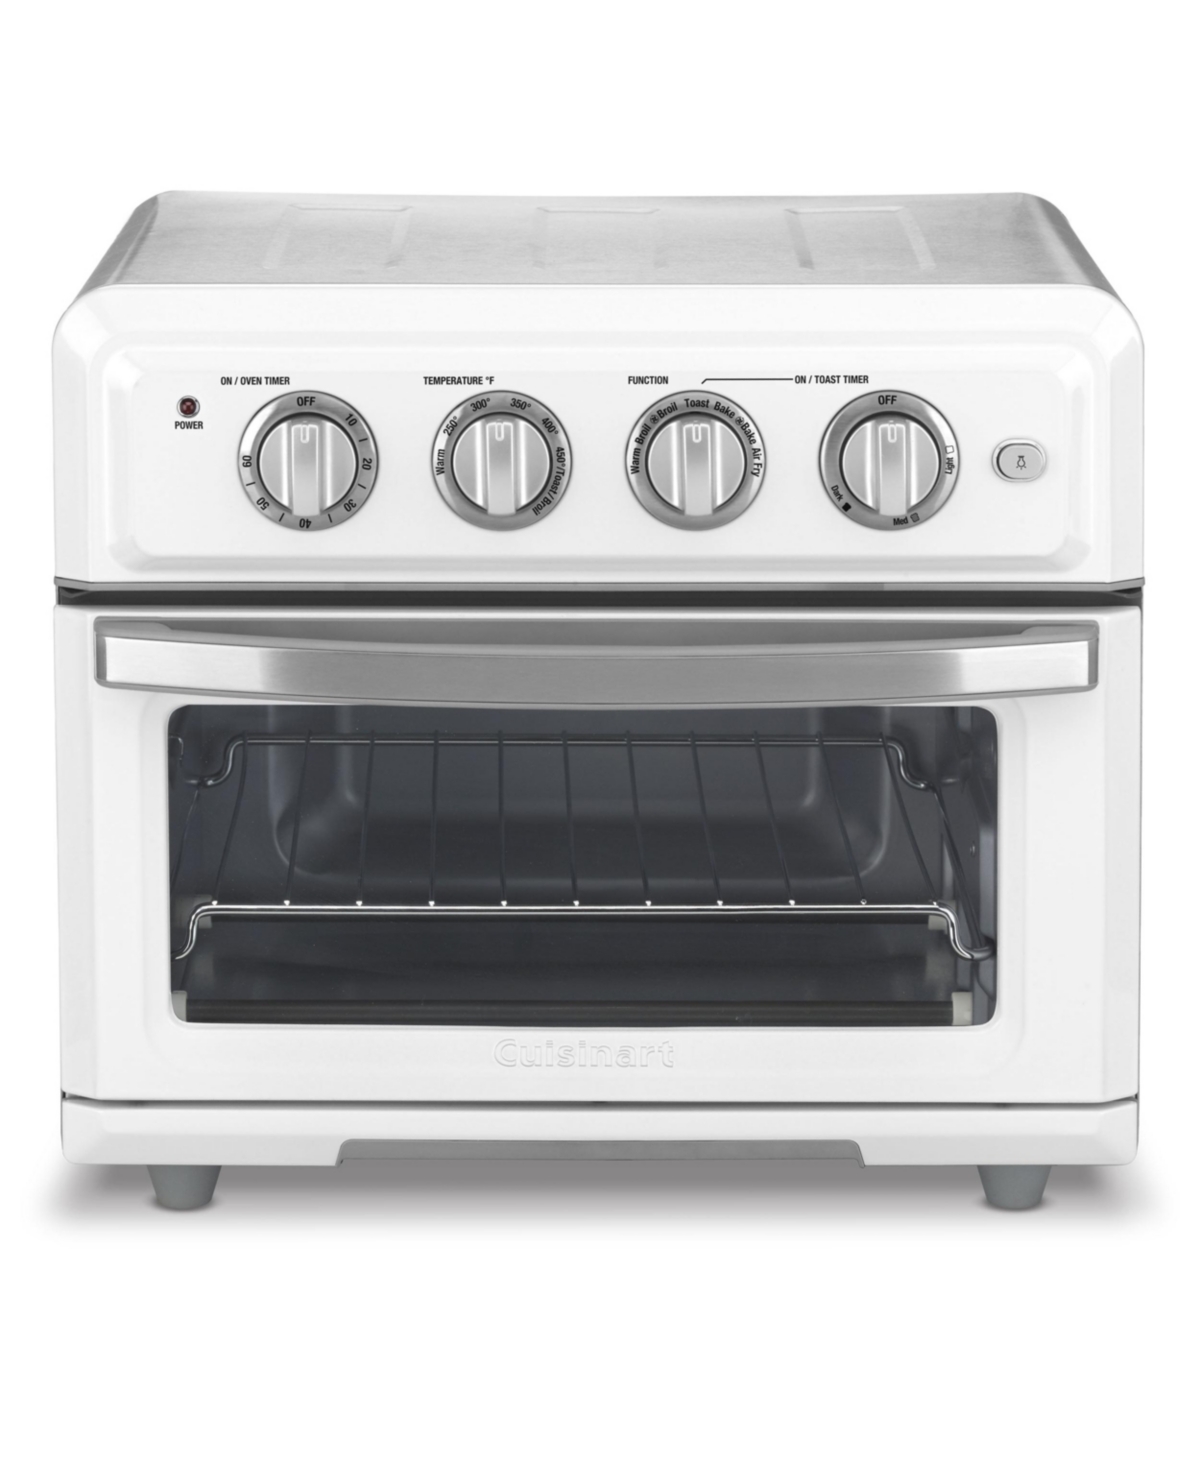 UPC 086279175205 product image for Cuisinart Toa-60W 1800 Watts Air Fryer Toaster Oven | upcitemdb.com